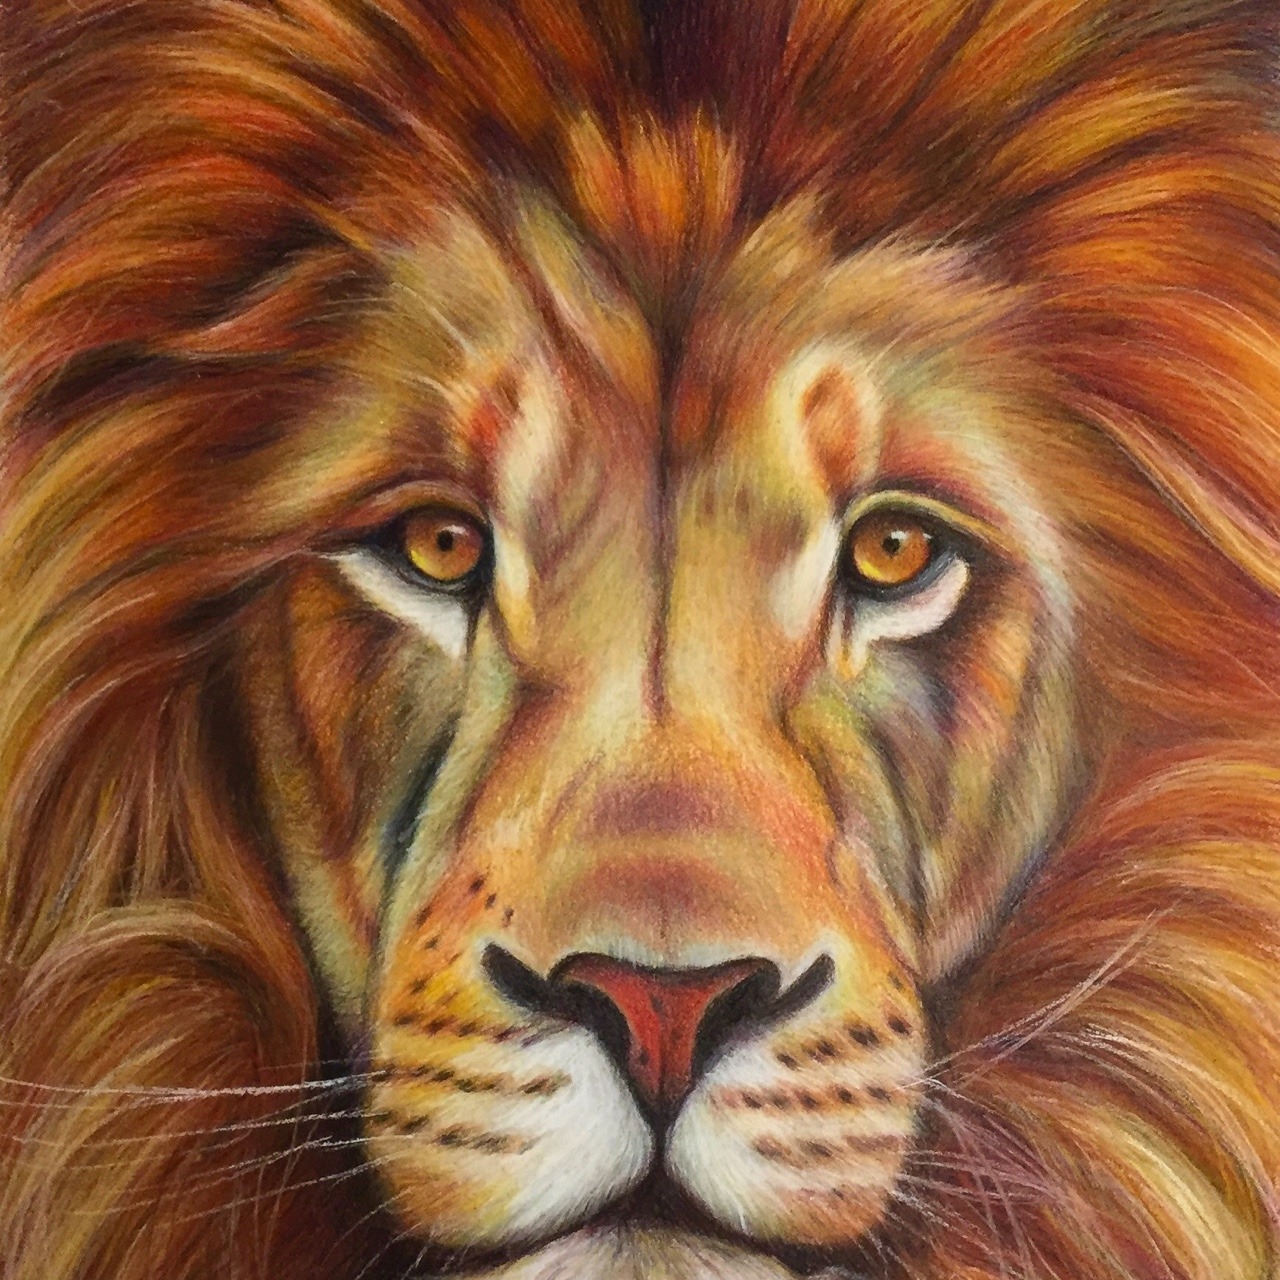 Pastel drawing of a lion. What do you think? — Immediately post your art to a topic and get feedback. Join our new community, EatSleepDraw Studio, today!